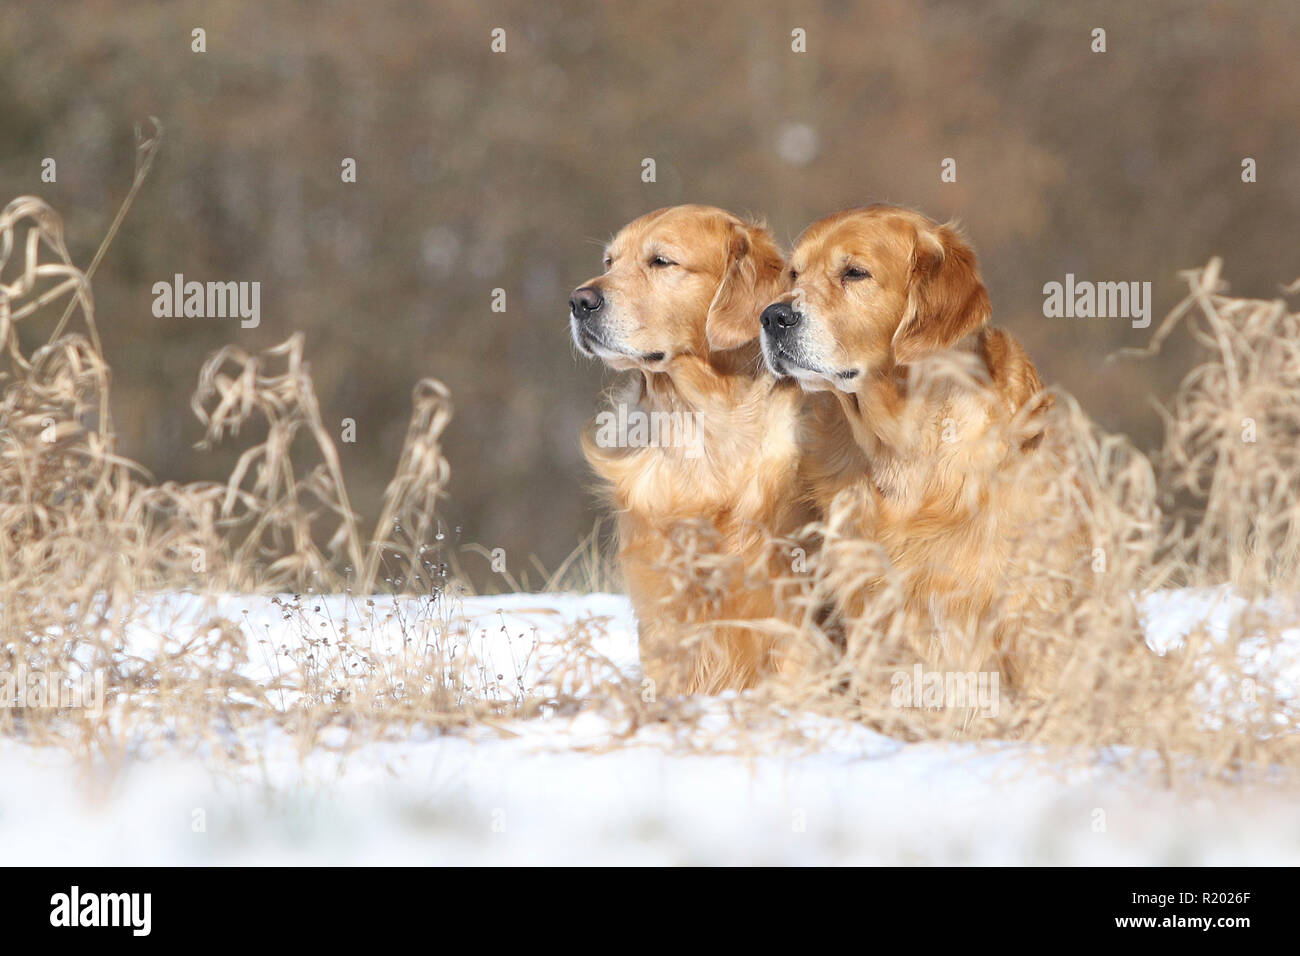 Golden Retriever. Father (8 years old, front) and son (3 years old, behind) sitting next to each other in snow. Germany Stock Photo